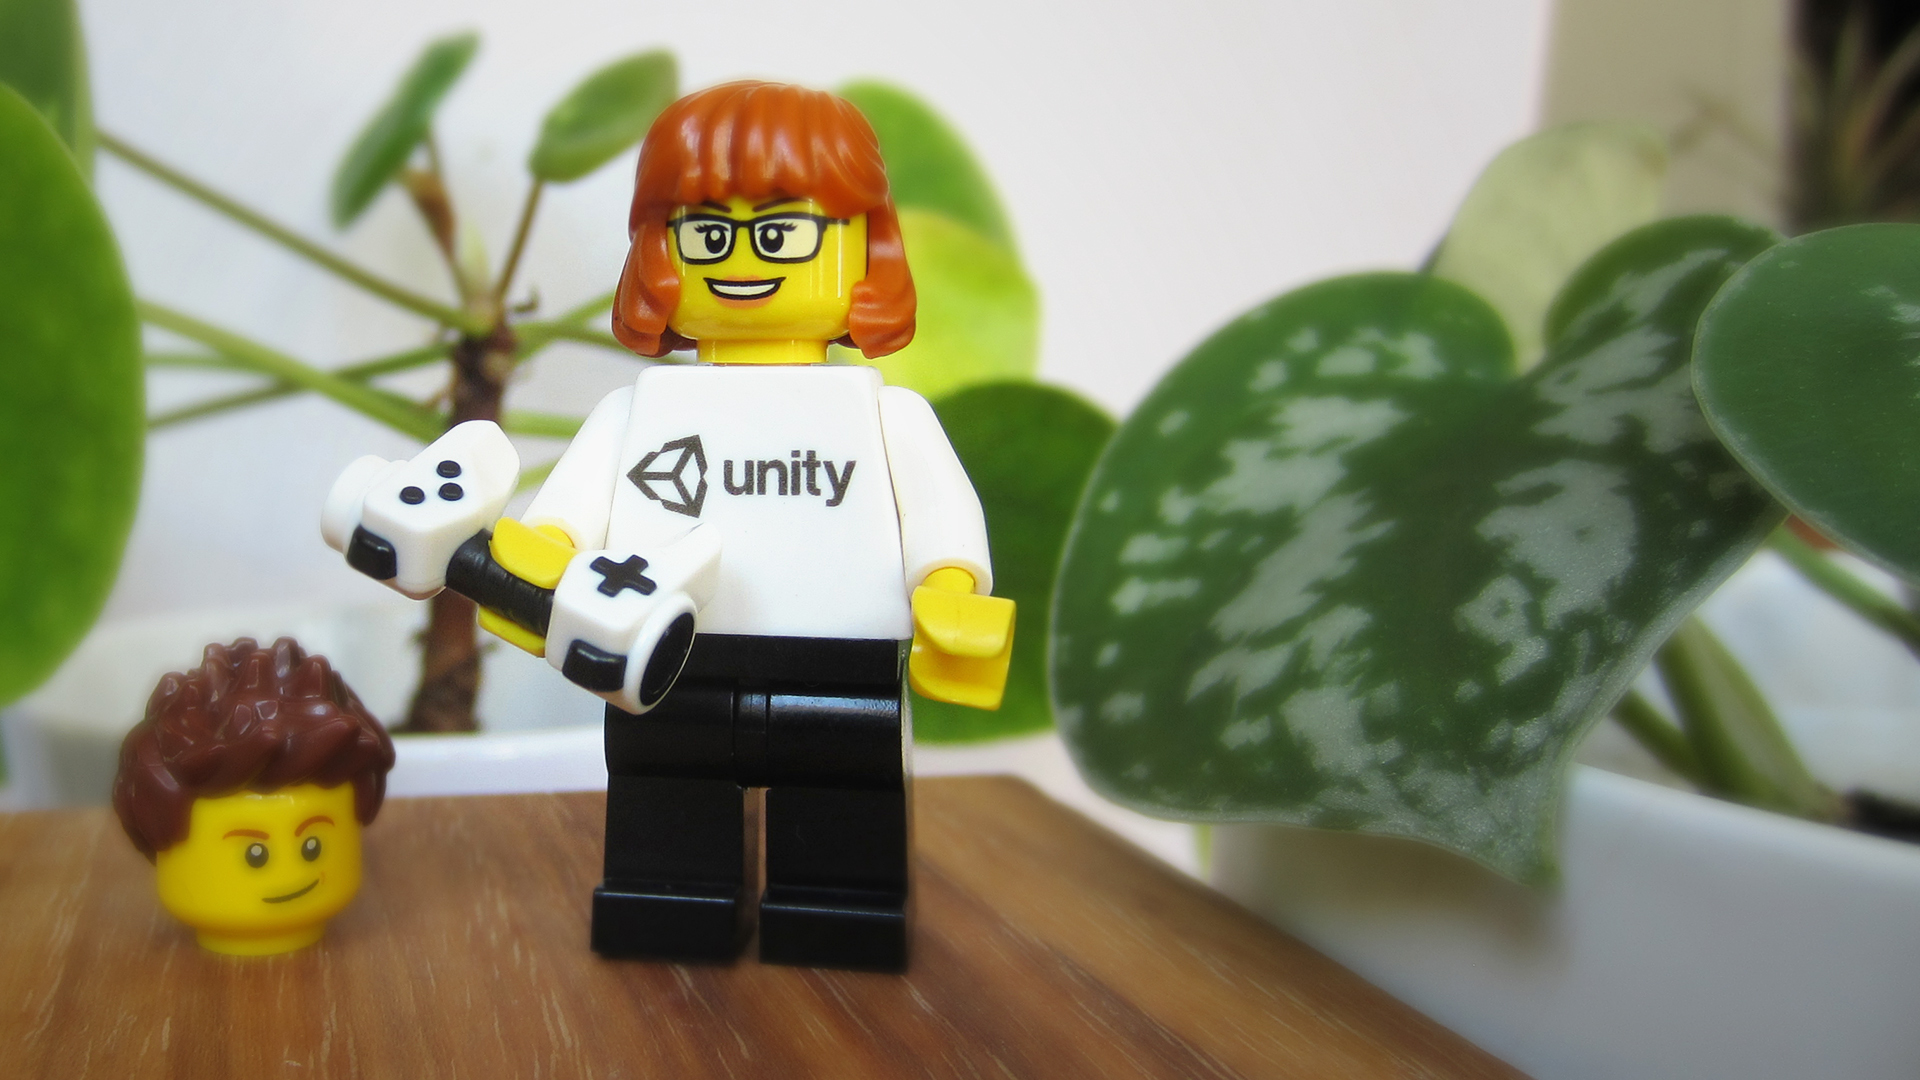 A lego minifigure wearing a with a white with a Unity logo on it's chest holding a video game controller